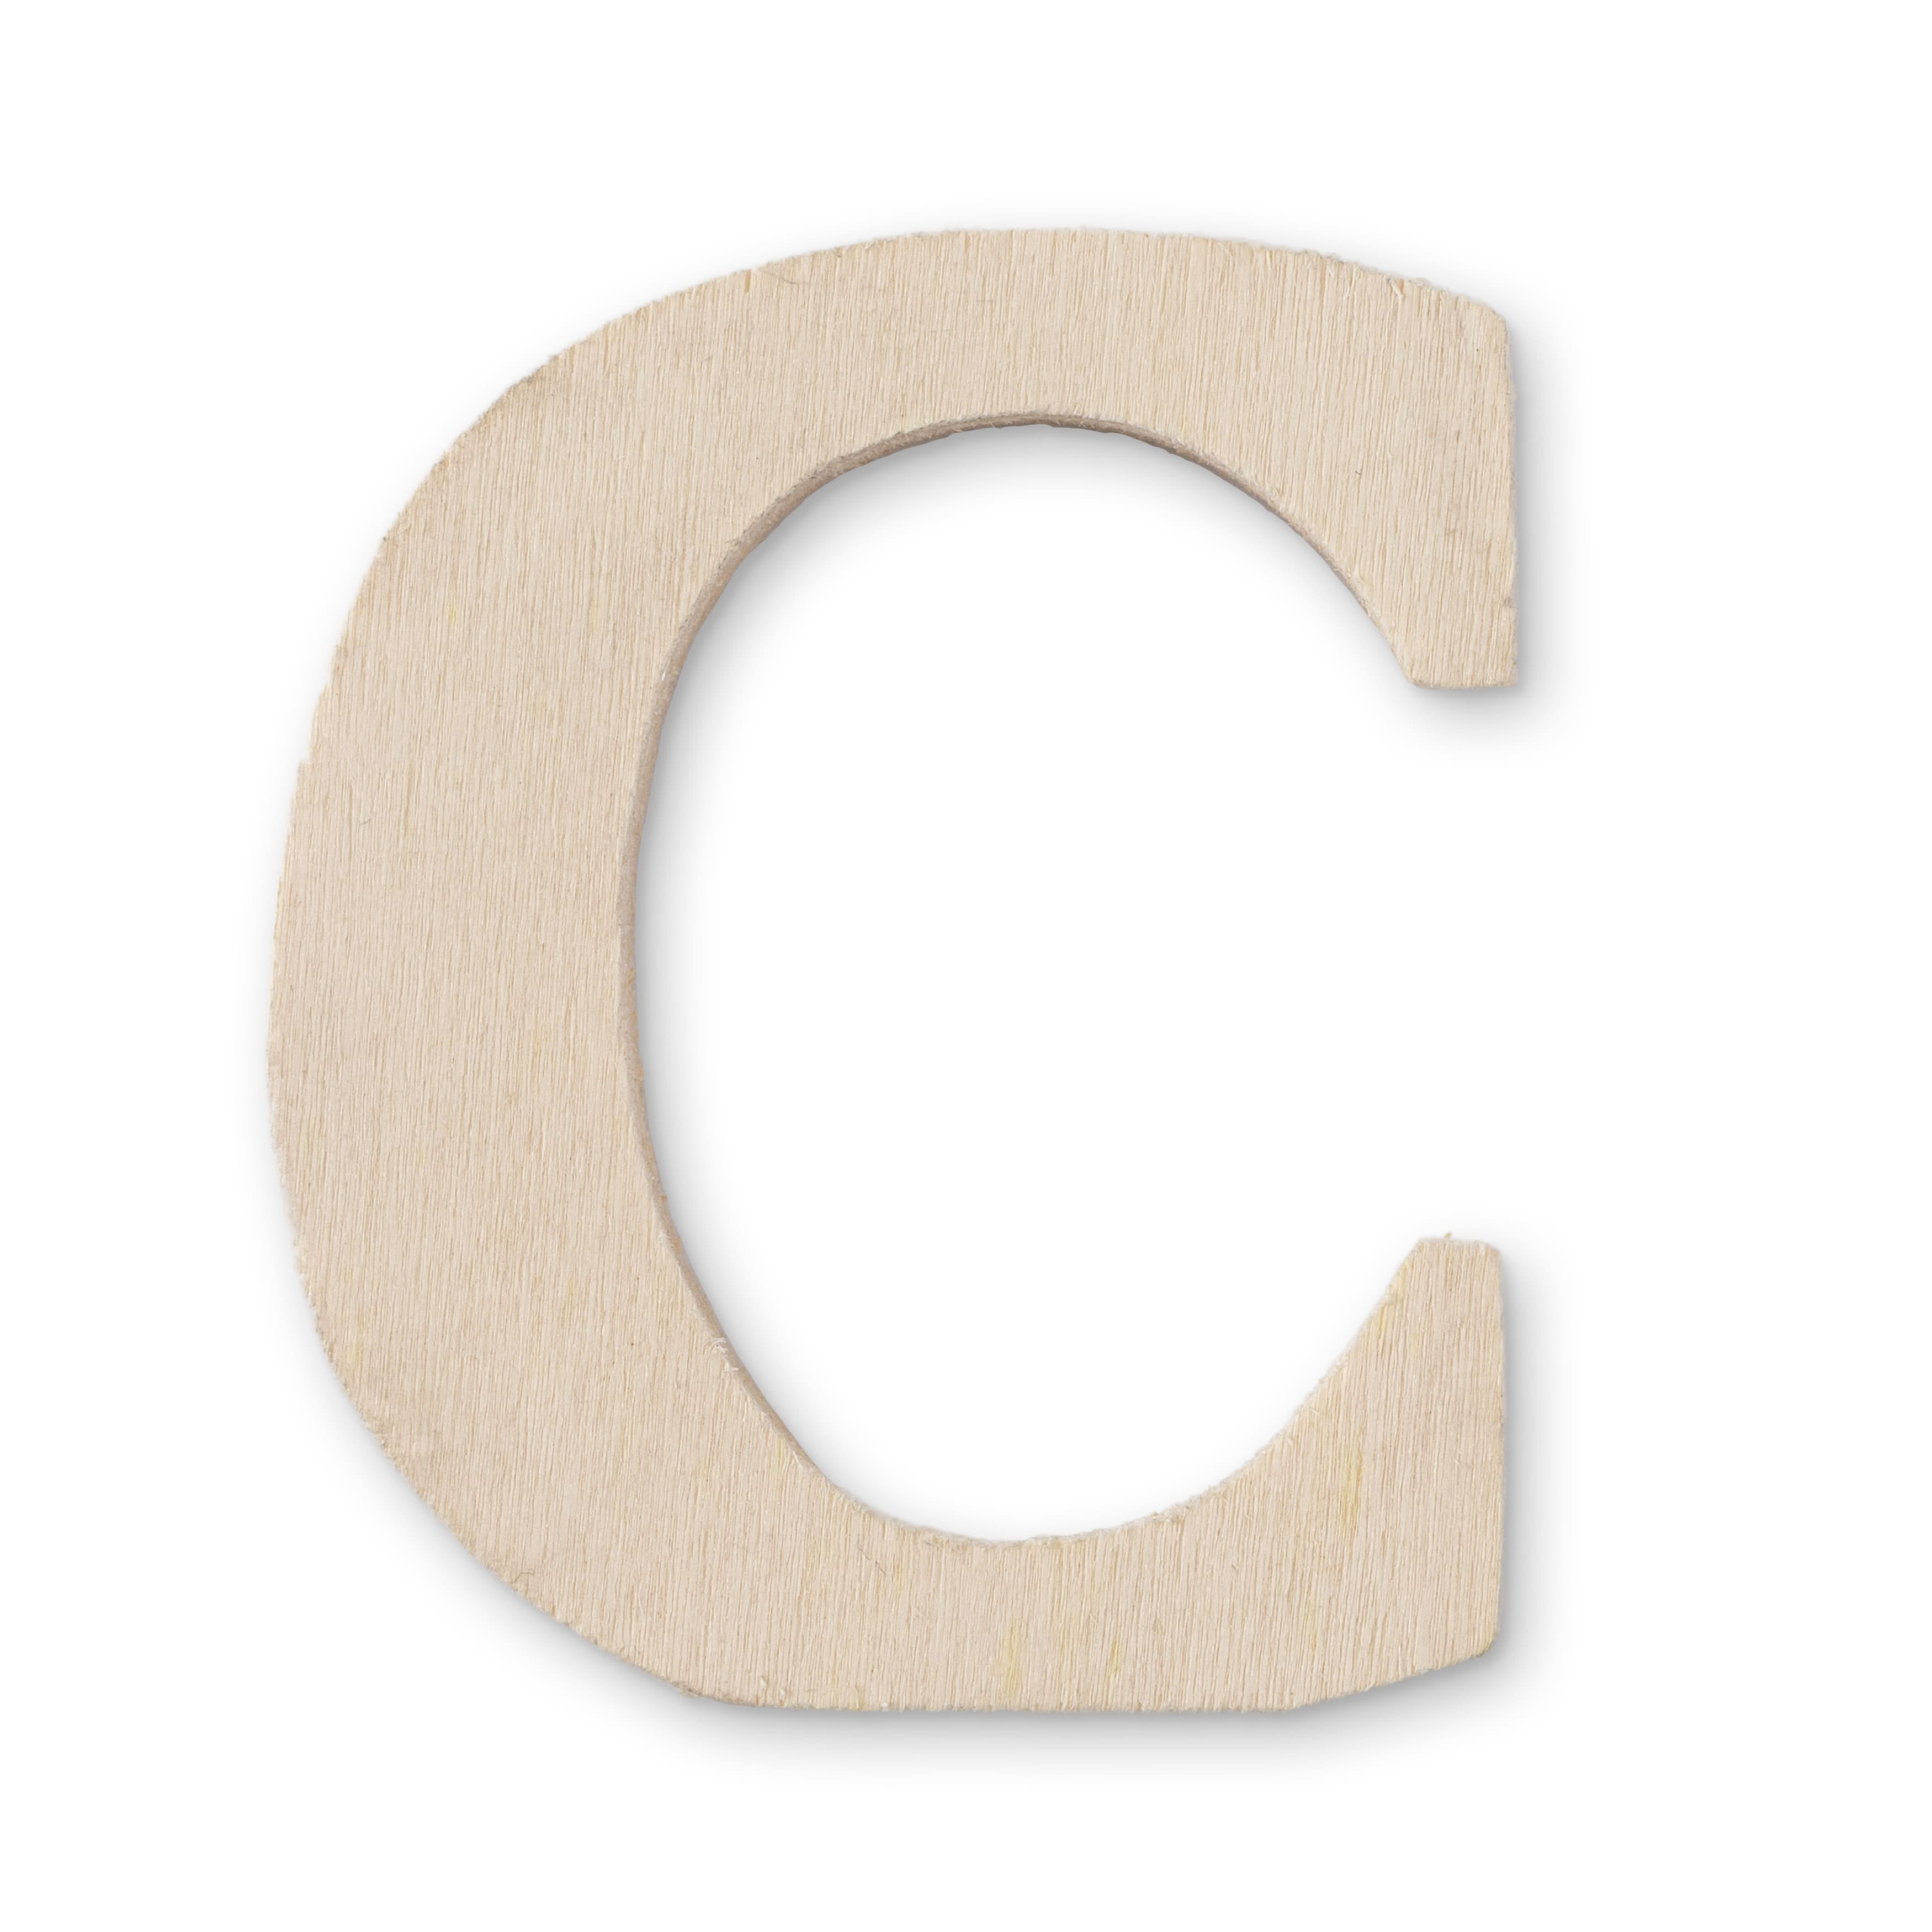 Pack of 1, 3 Inch x 1/4 Inch V Round Font Wood Letters for Wood Craft  Project, Children or Adult Art Work, Home and Holiday Décor and DIY Fun,  Made in USA 